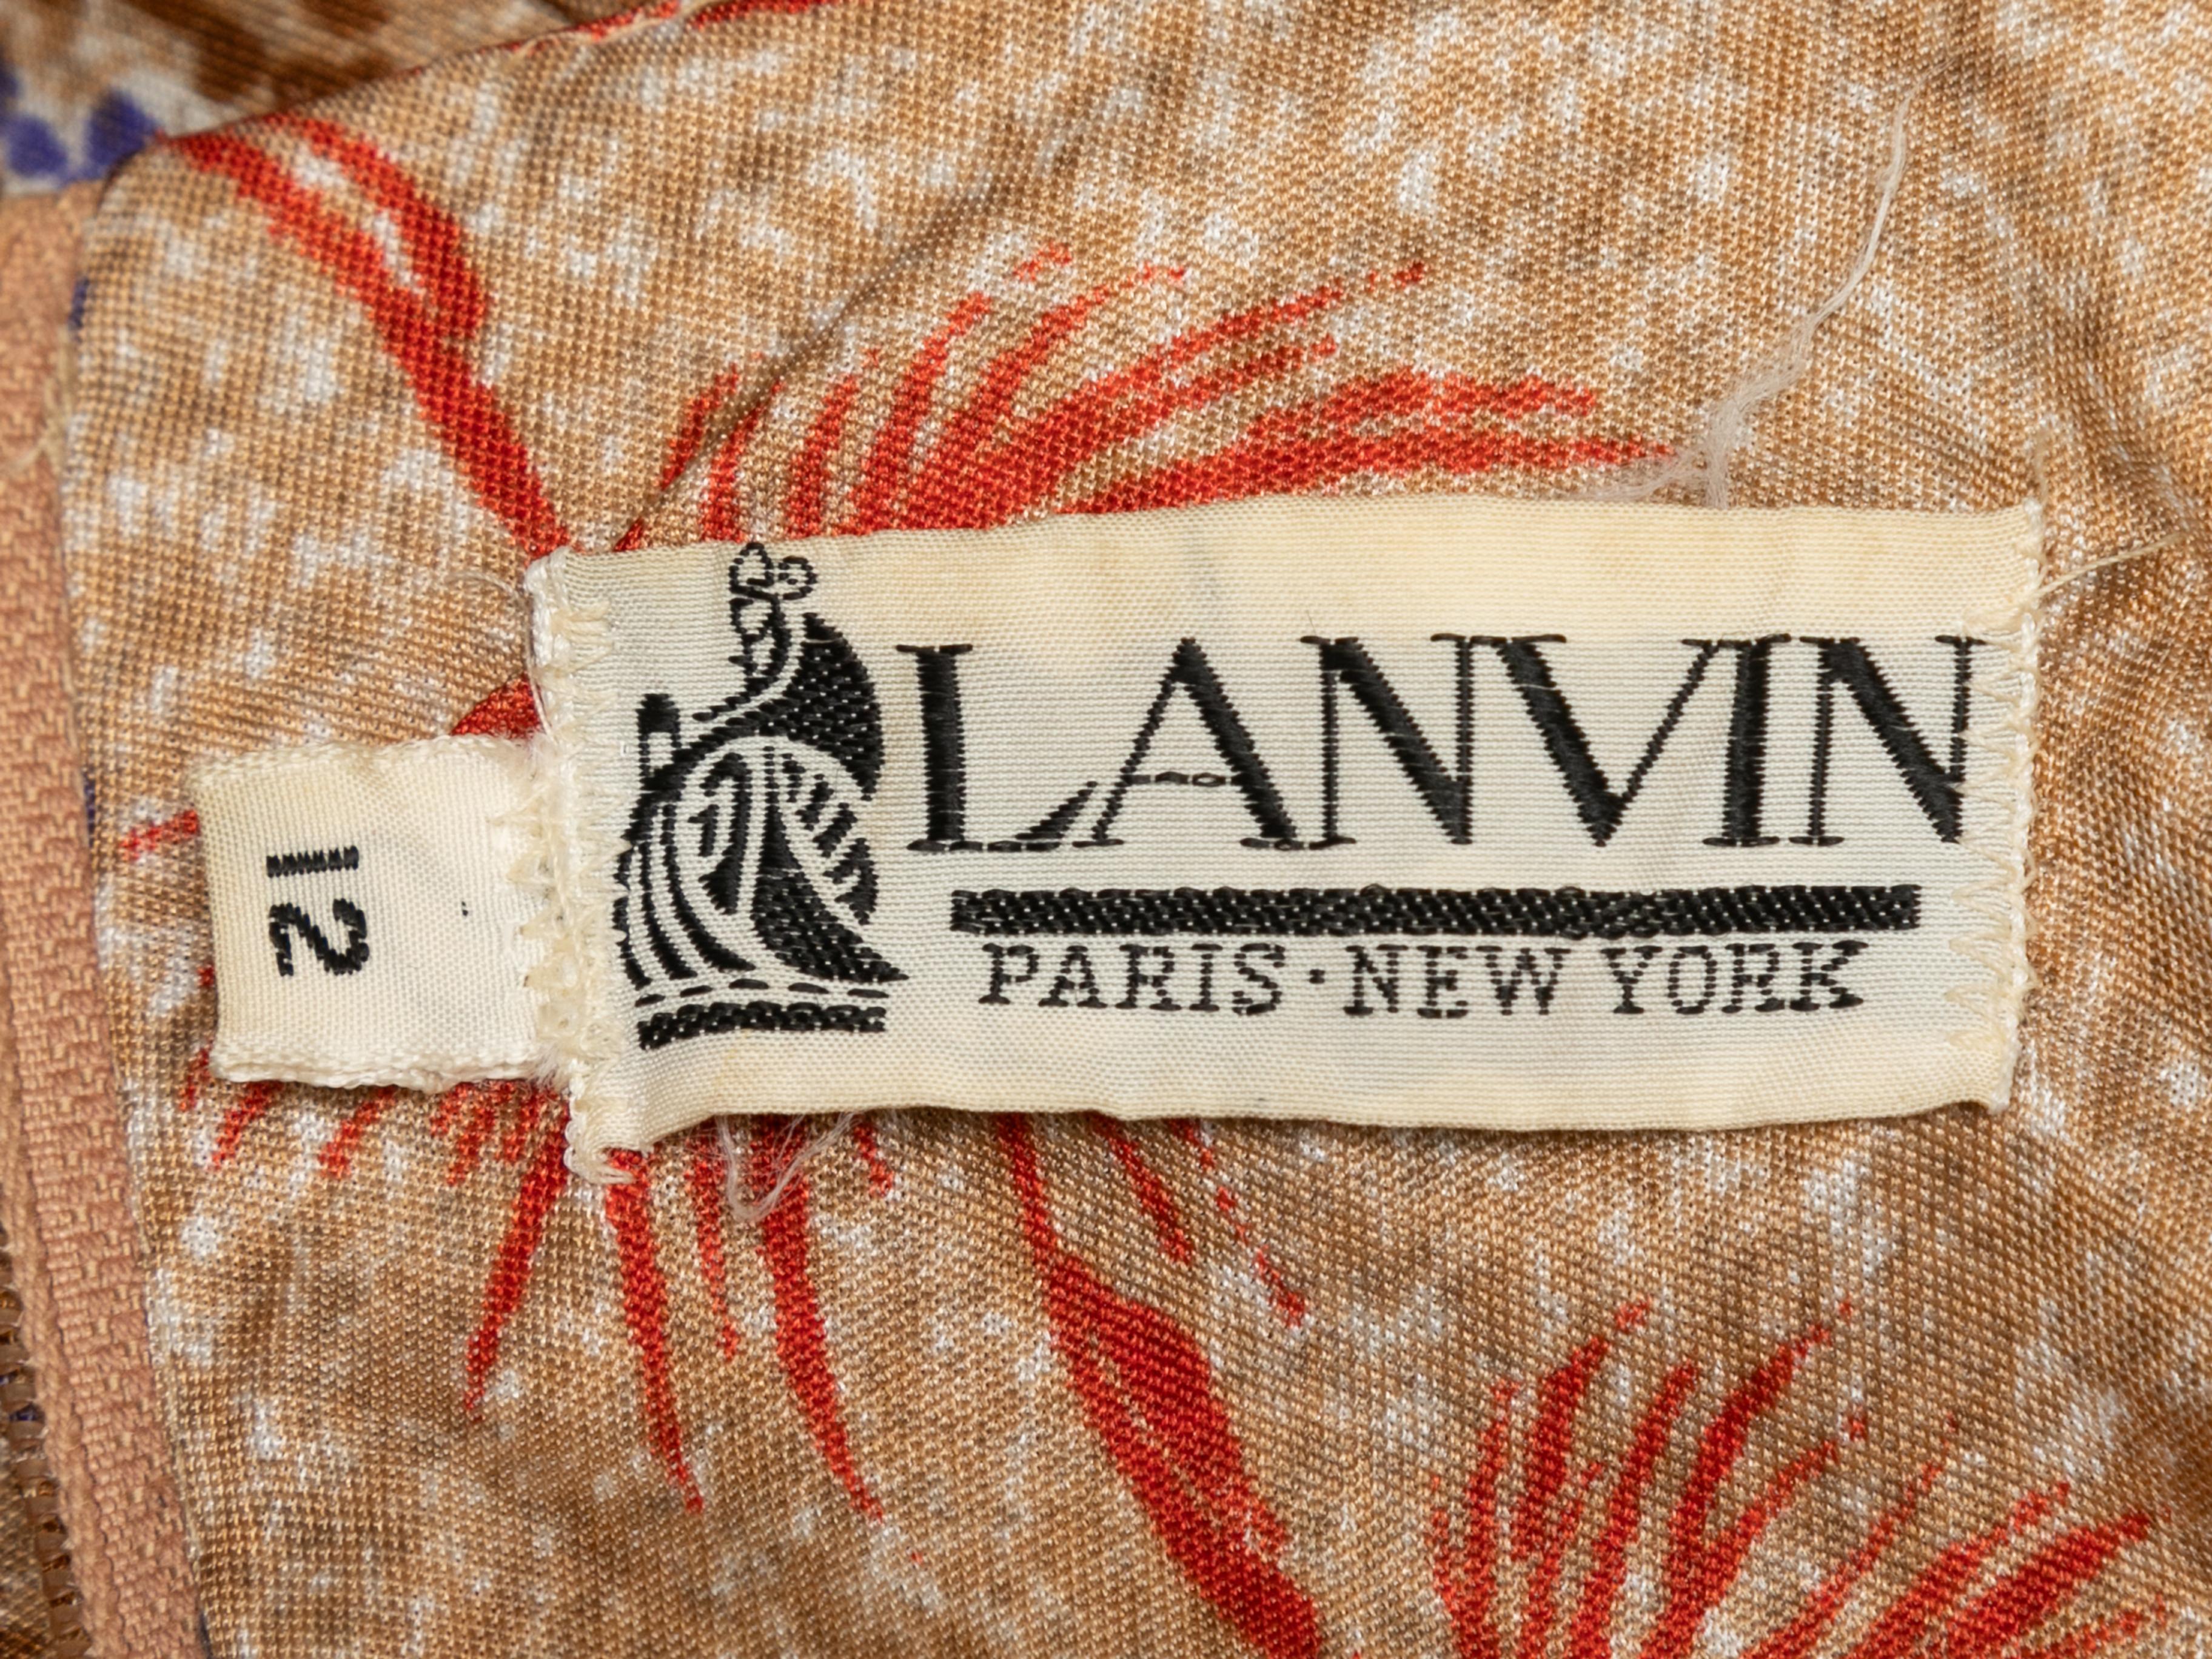 Vintage beige and multicolor tree print maxi dress by Lanvin. V-neck. Long sleeves. Zip closure at back. 36